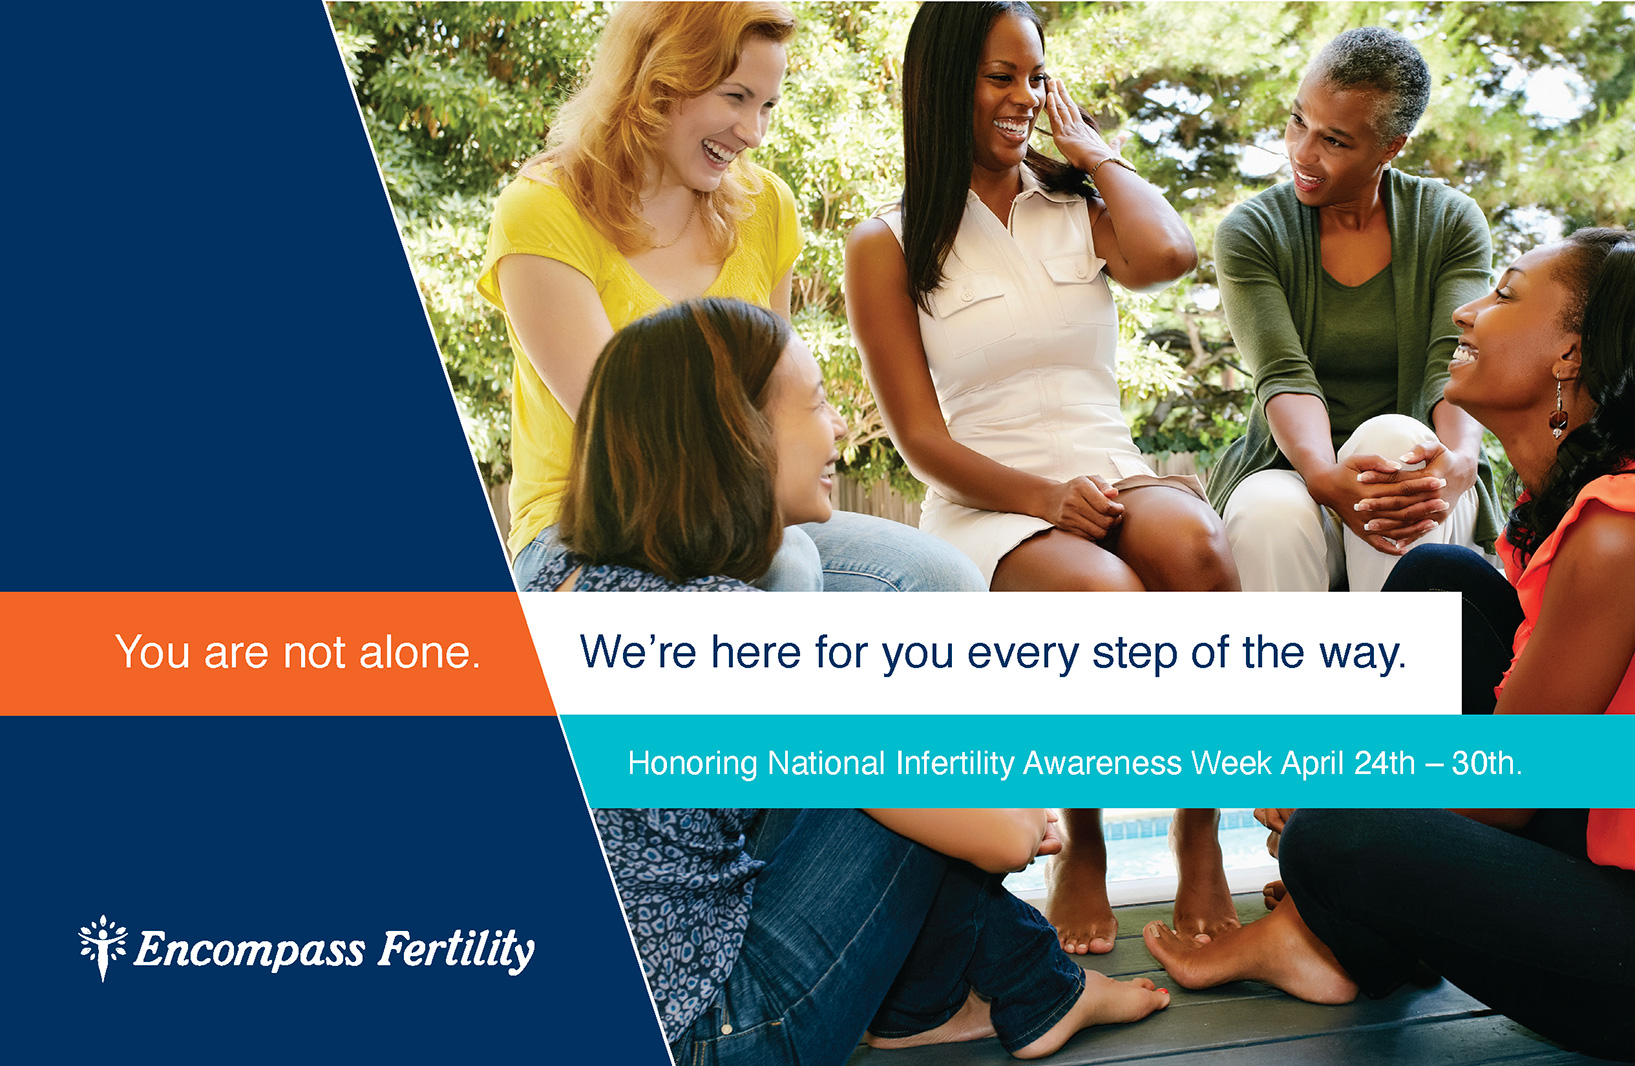 Five women sit in a circle and  laugh together. Text on graphic reads: "Encompass Fertility — You are not alone. We are here for you every step of the way. Honoring National Infertility Awareness Week April 24th - 30th"